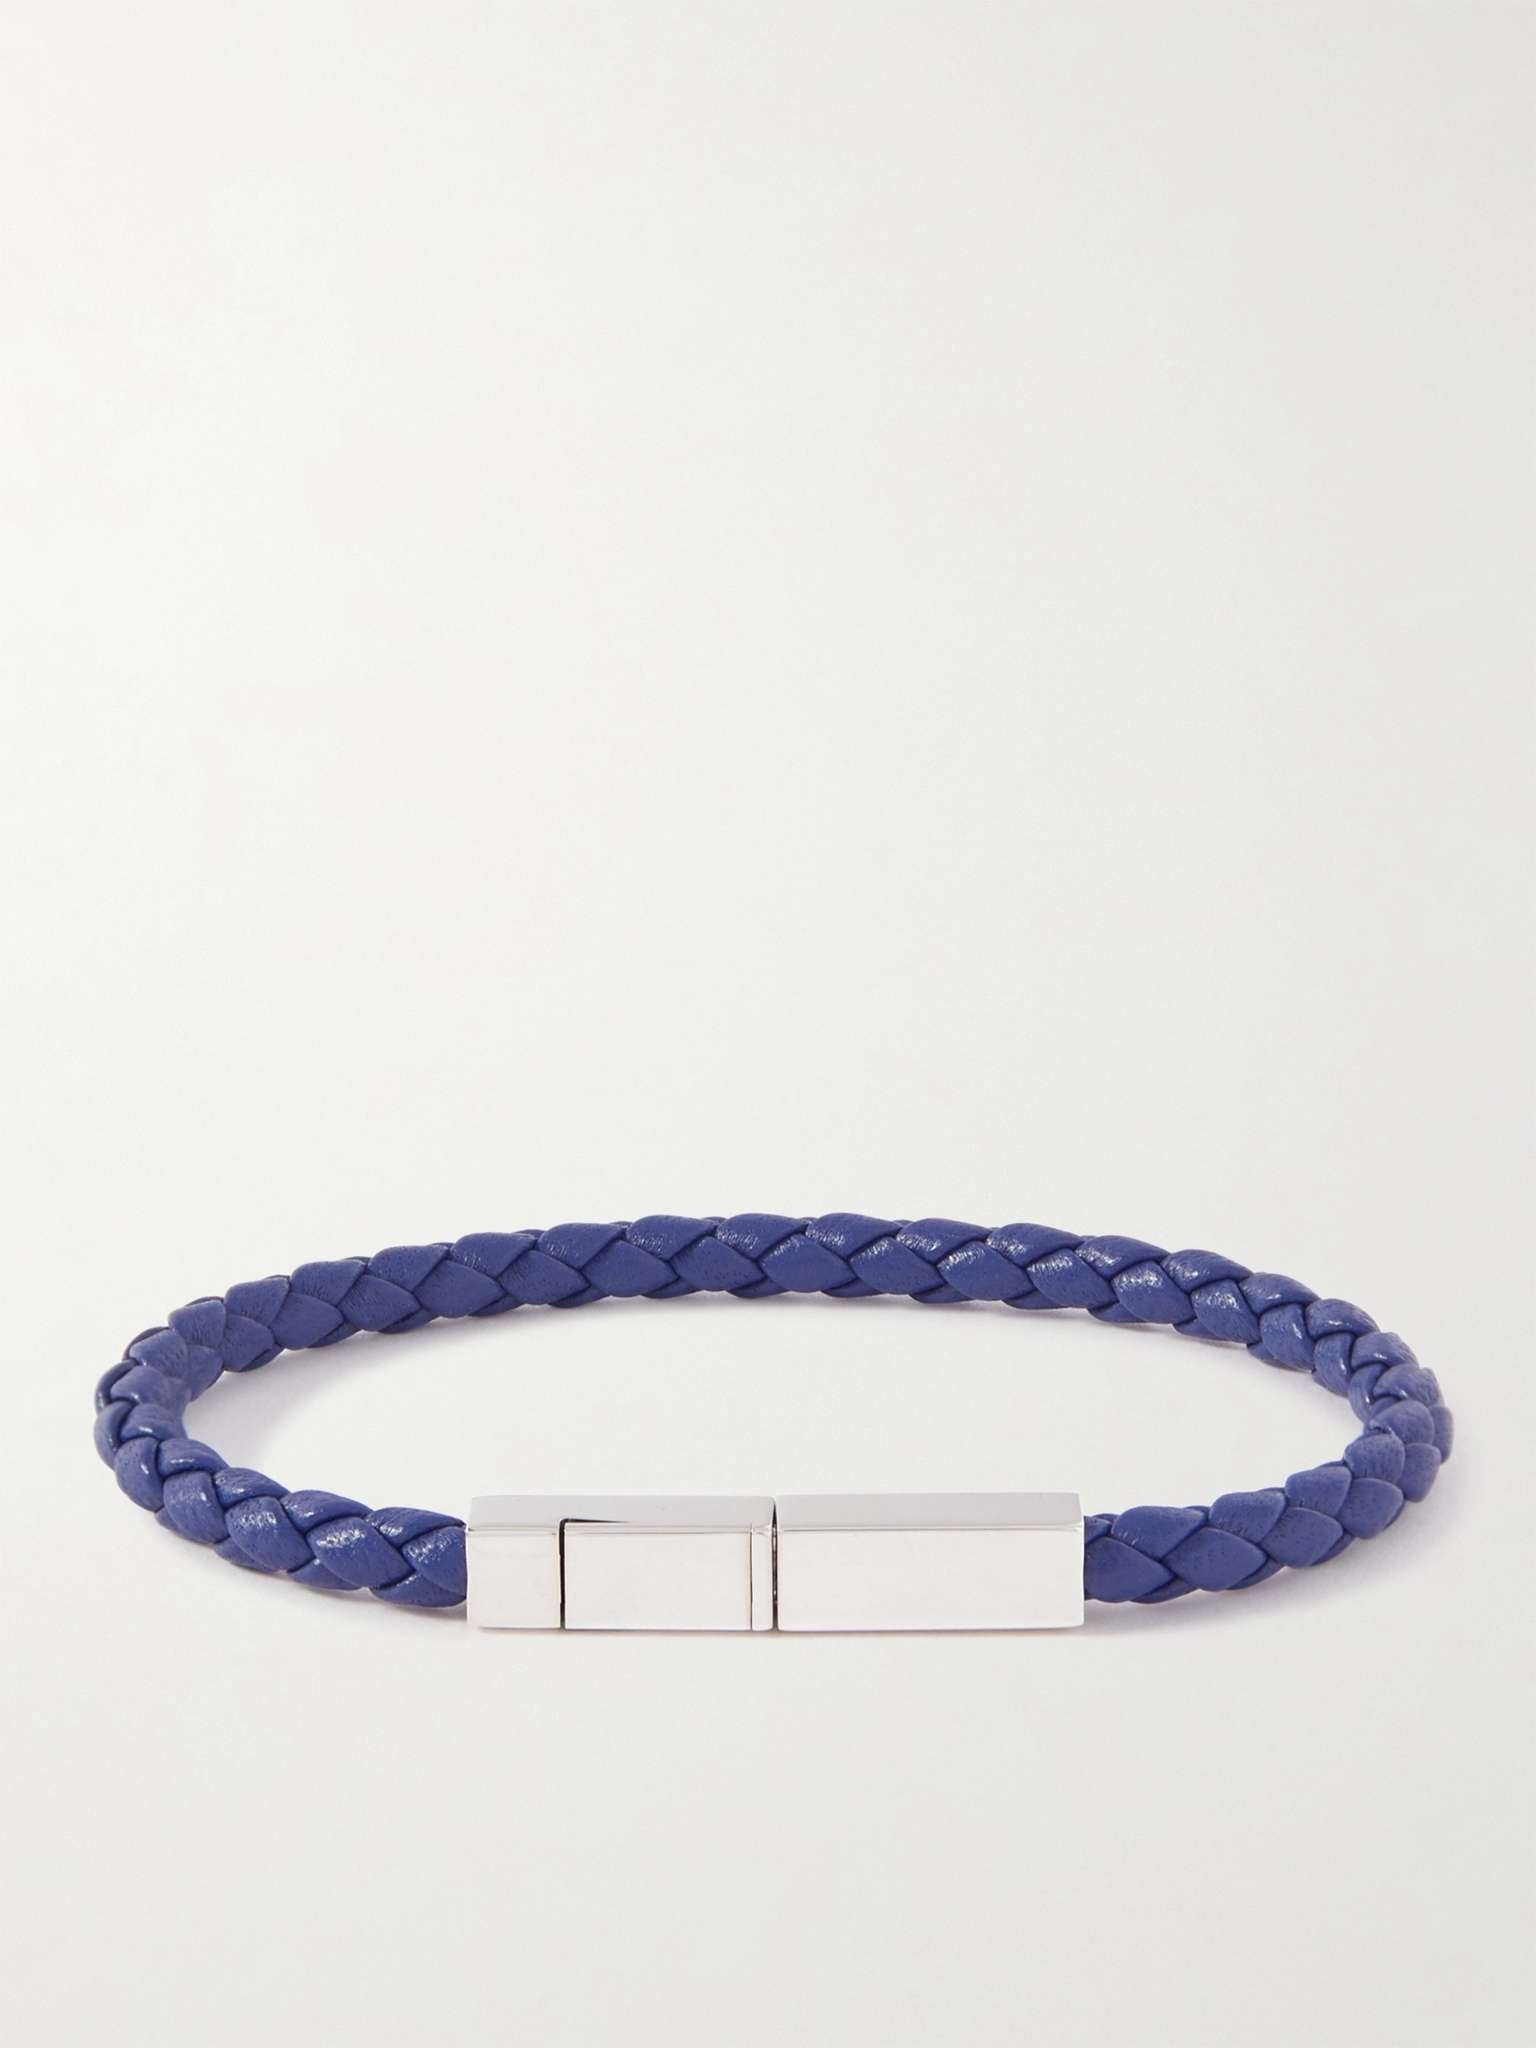 Braided Leather and Sterling Silver Bracelet - 1